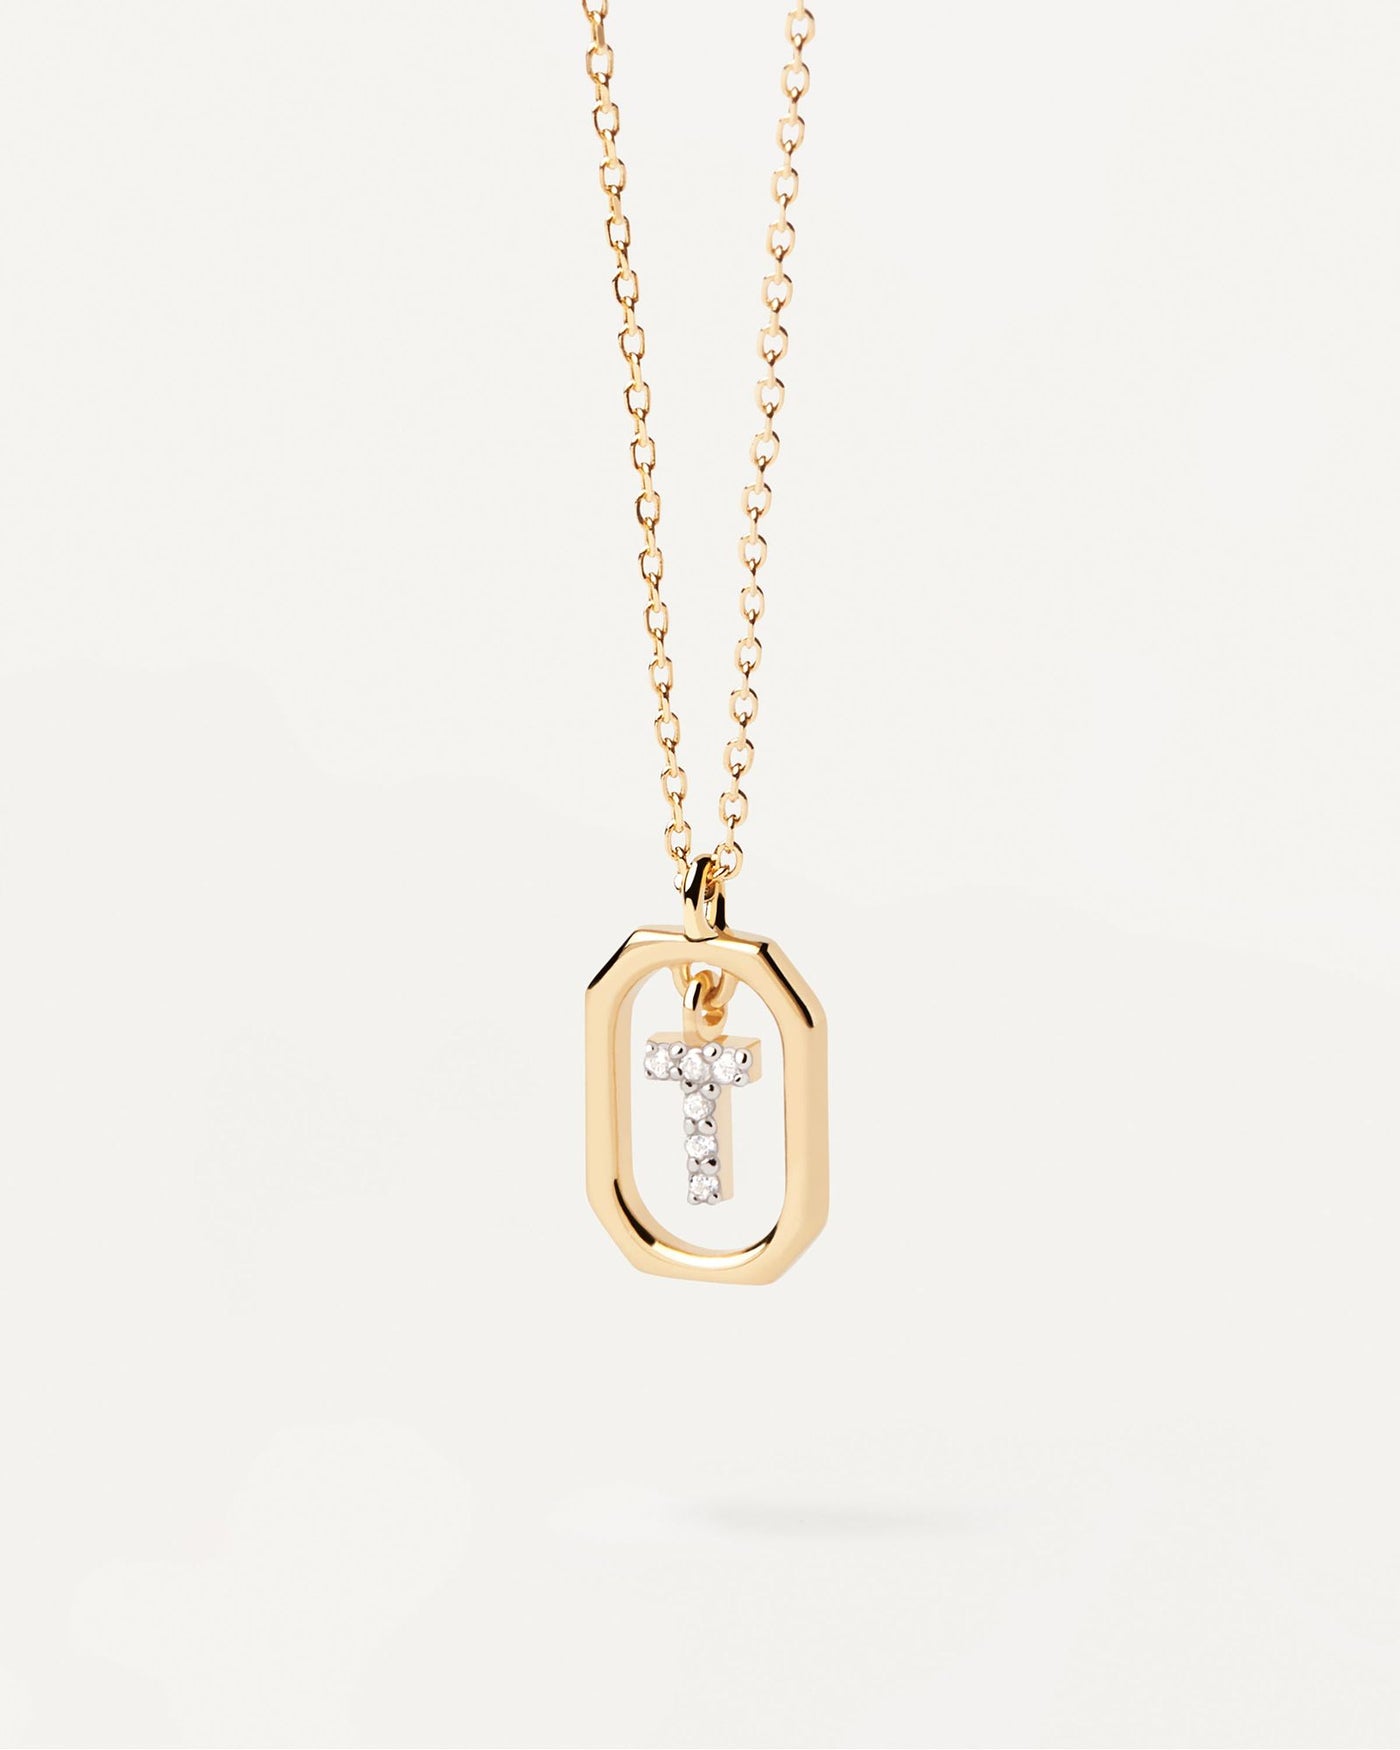 2024 Selection | Mini Letter T Necklace. Small initial T necklace in zirconia inside gold-plated silver octagonal pendant. Get the latest arrival from PDPAOLA. Place your order safely and get this Best Seller. Free Shipping.